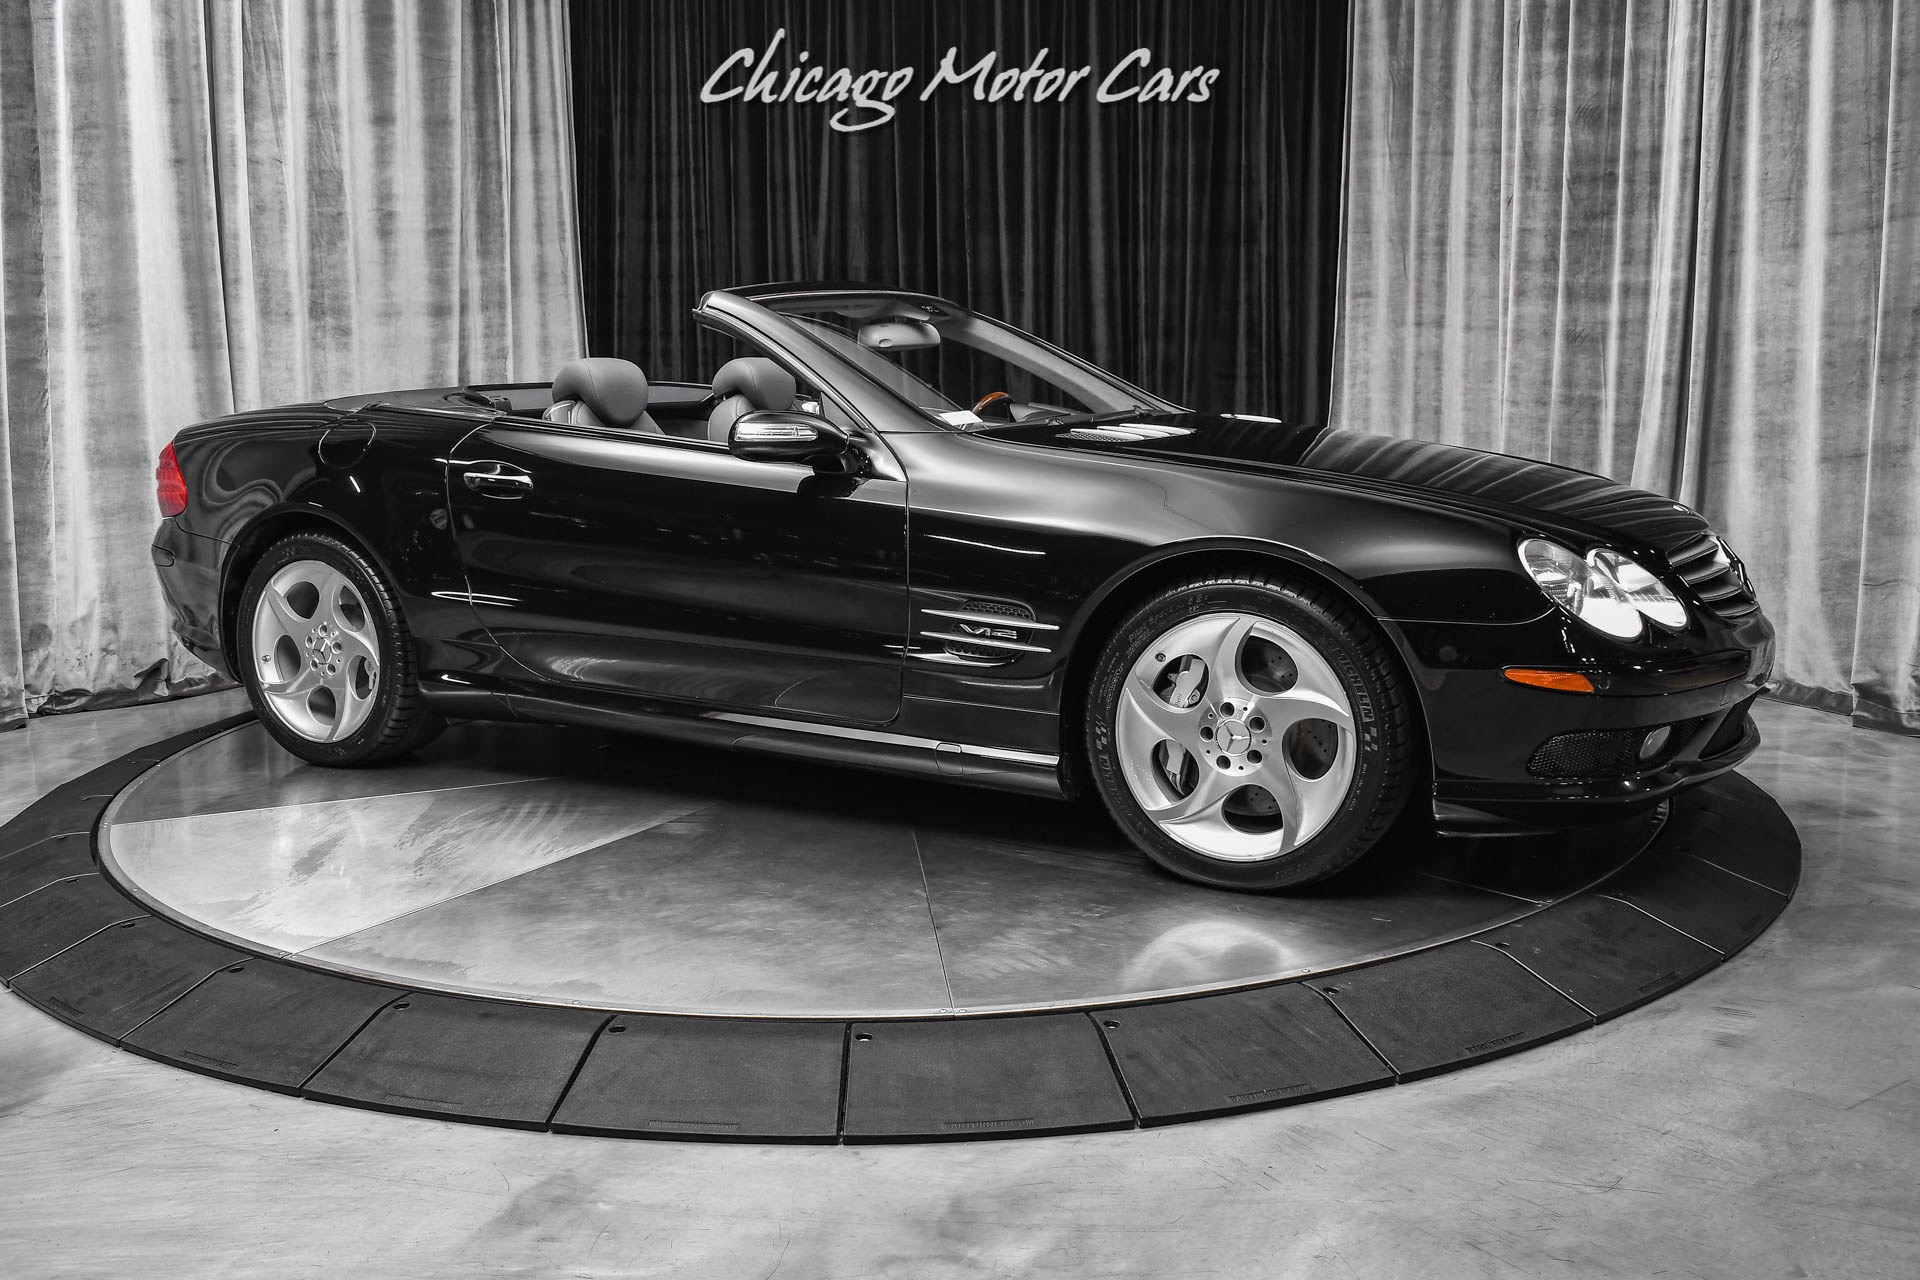 Used-2005-Mercedes-Benz-SL600-55L-V12-Engine-Very-Low-Miles-Pristine-Example-Throughout